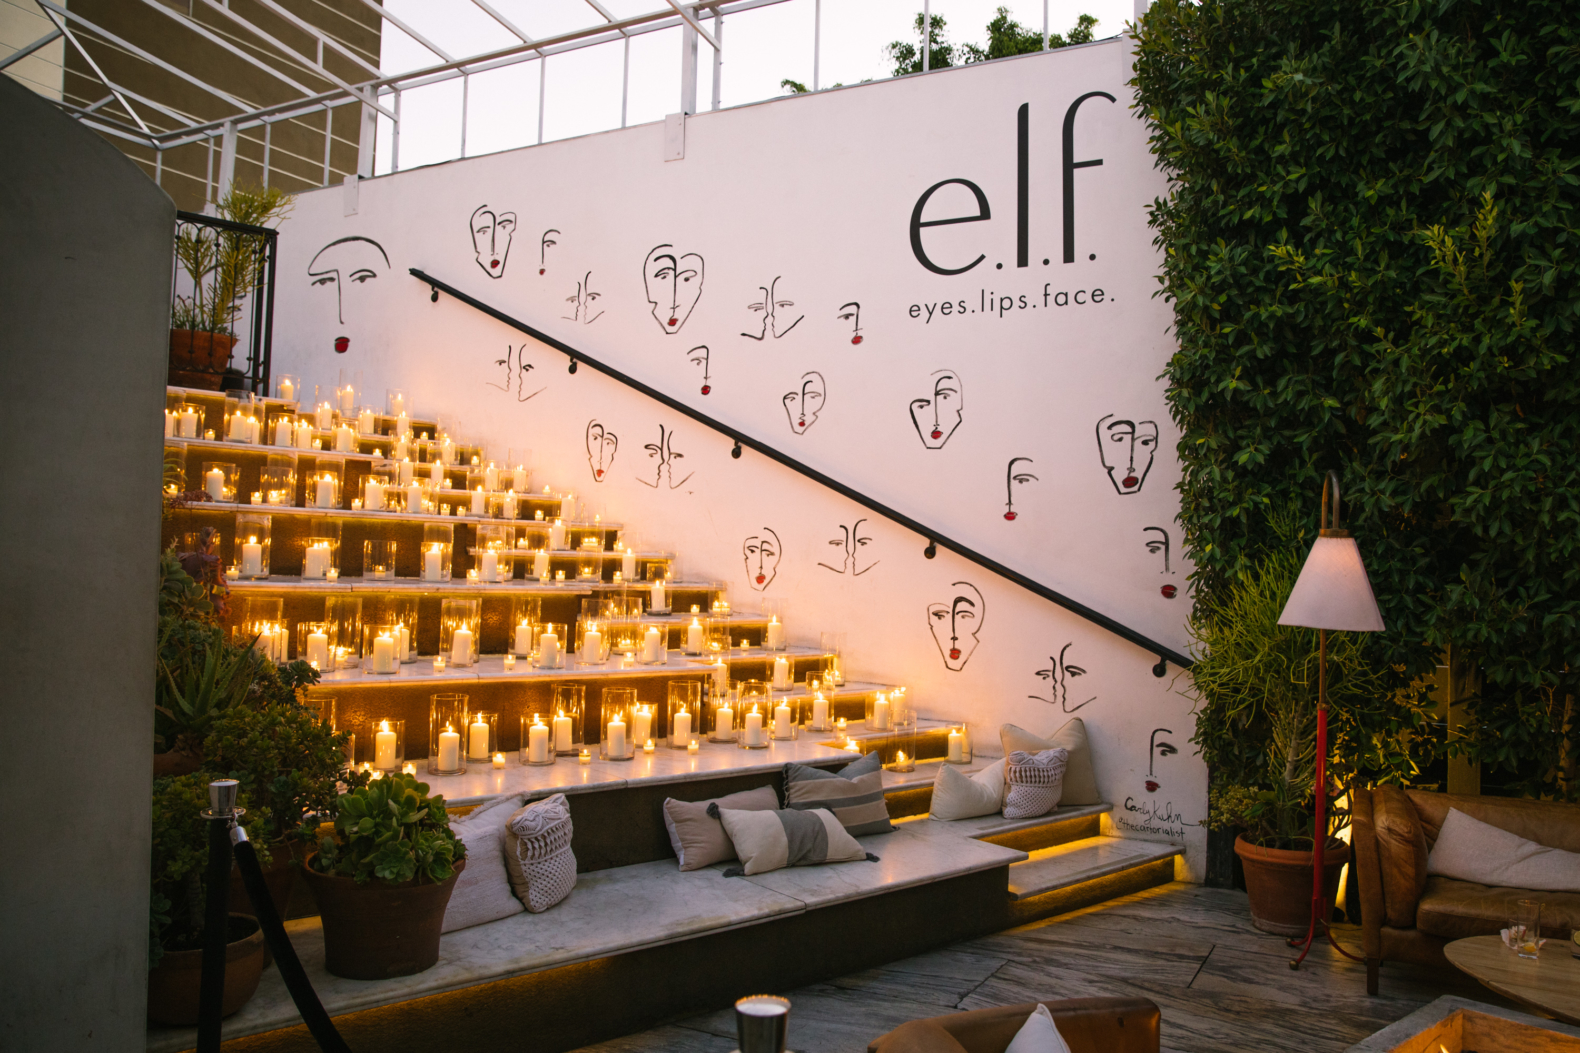 Wide stairs filled with glowing candles, white wall with e.l.f. Logo and abstract drawings of faces. Bottom of stairs is a lounge seat with pillows, a lamp and greenery on the far wall.